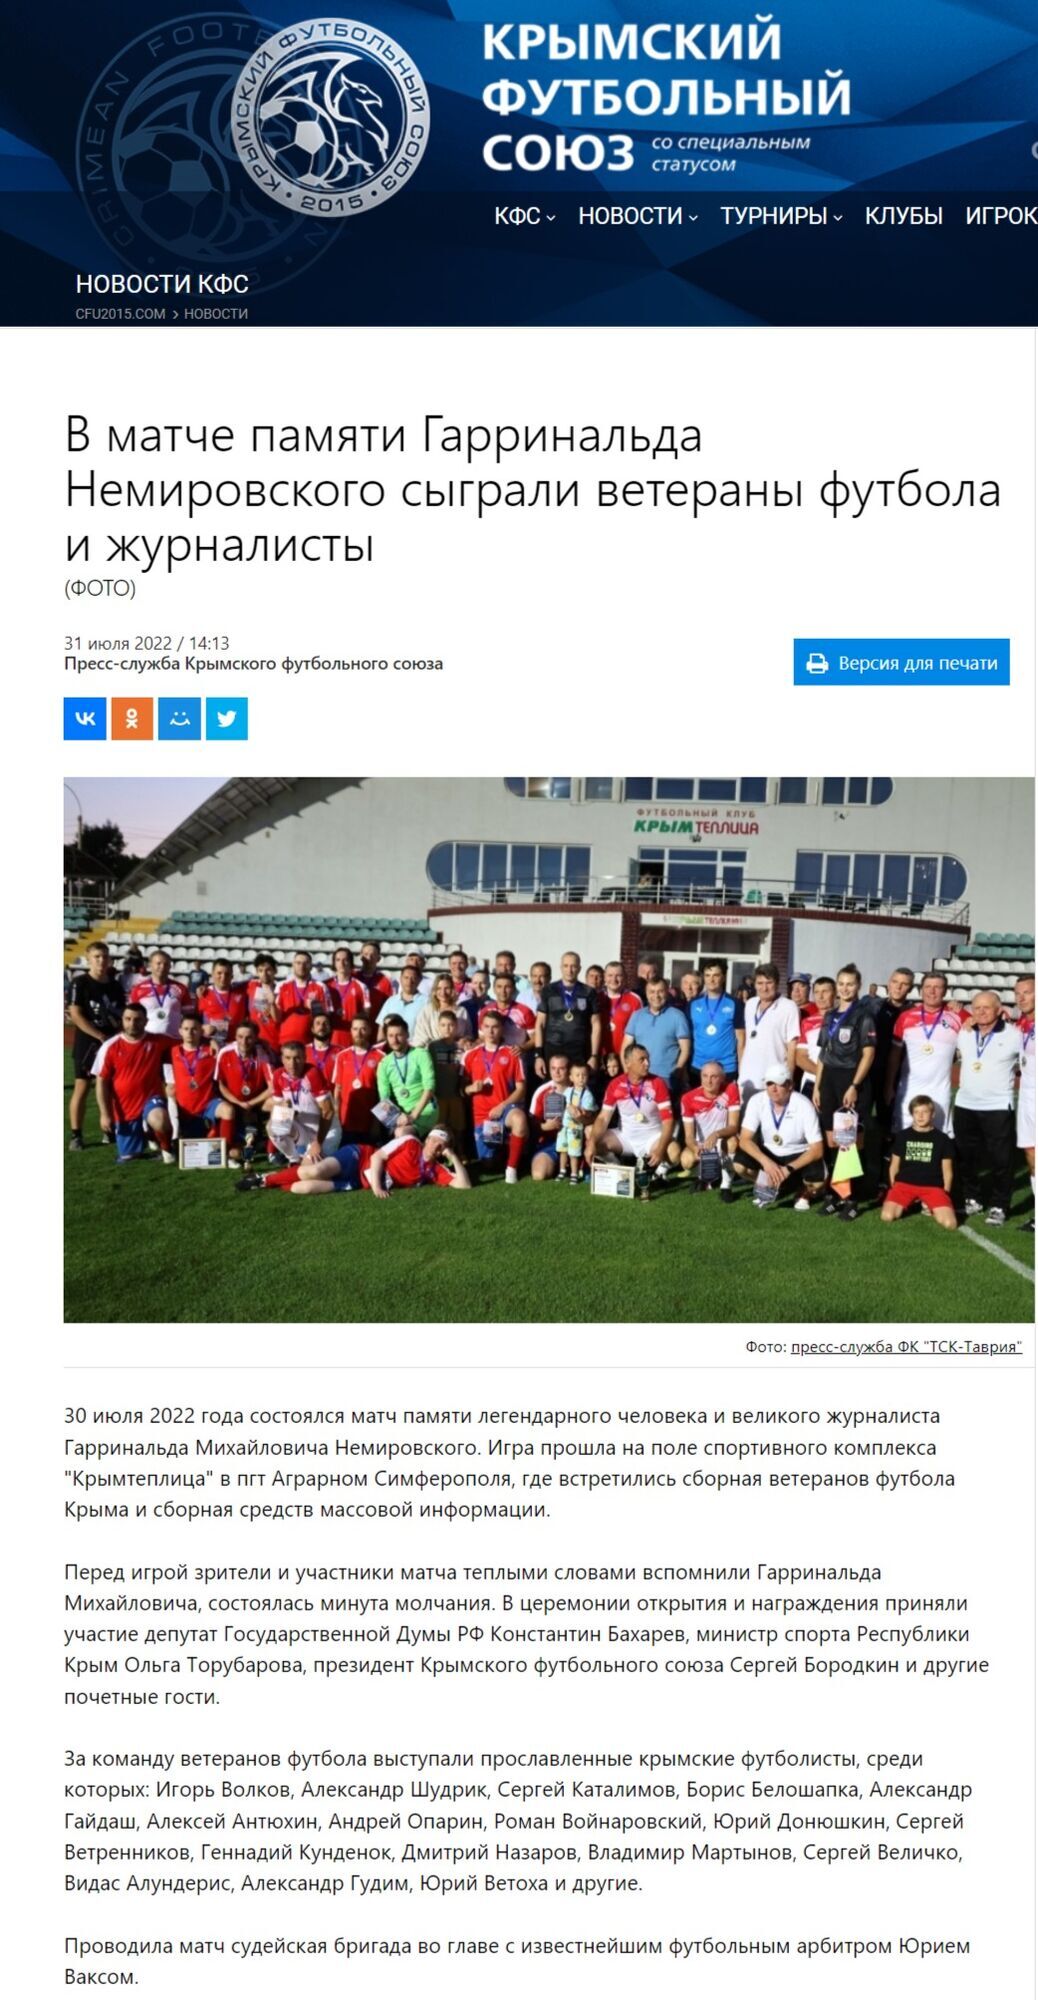 Betrayed Ukraine for the sake of the national team of occupied Crimea: former Dynamo forward helped Russian propaganda